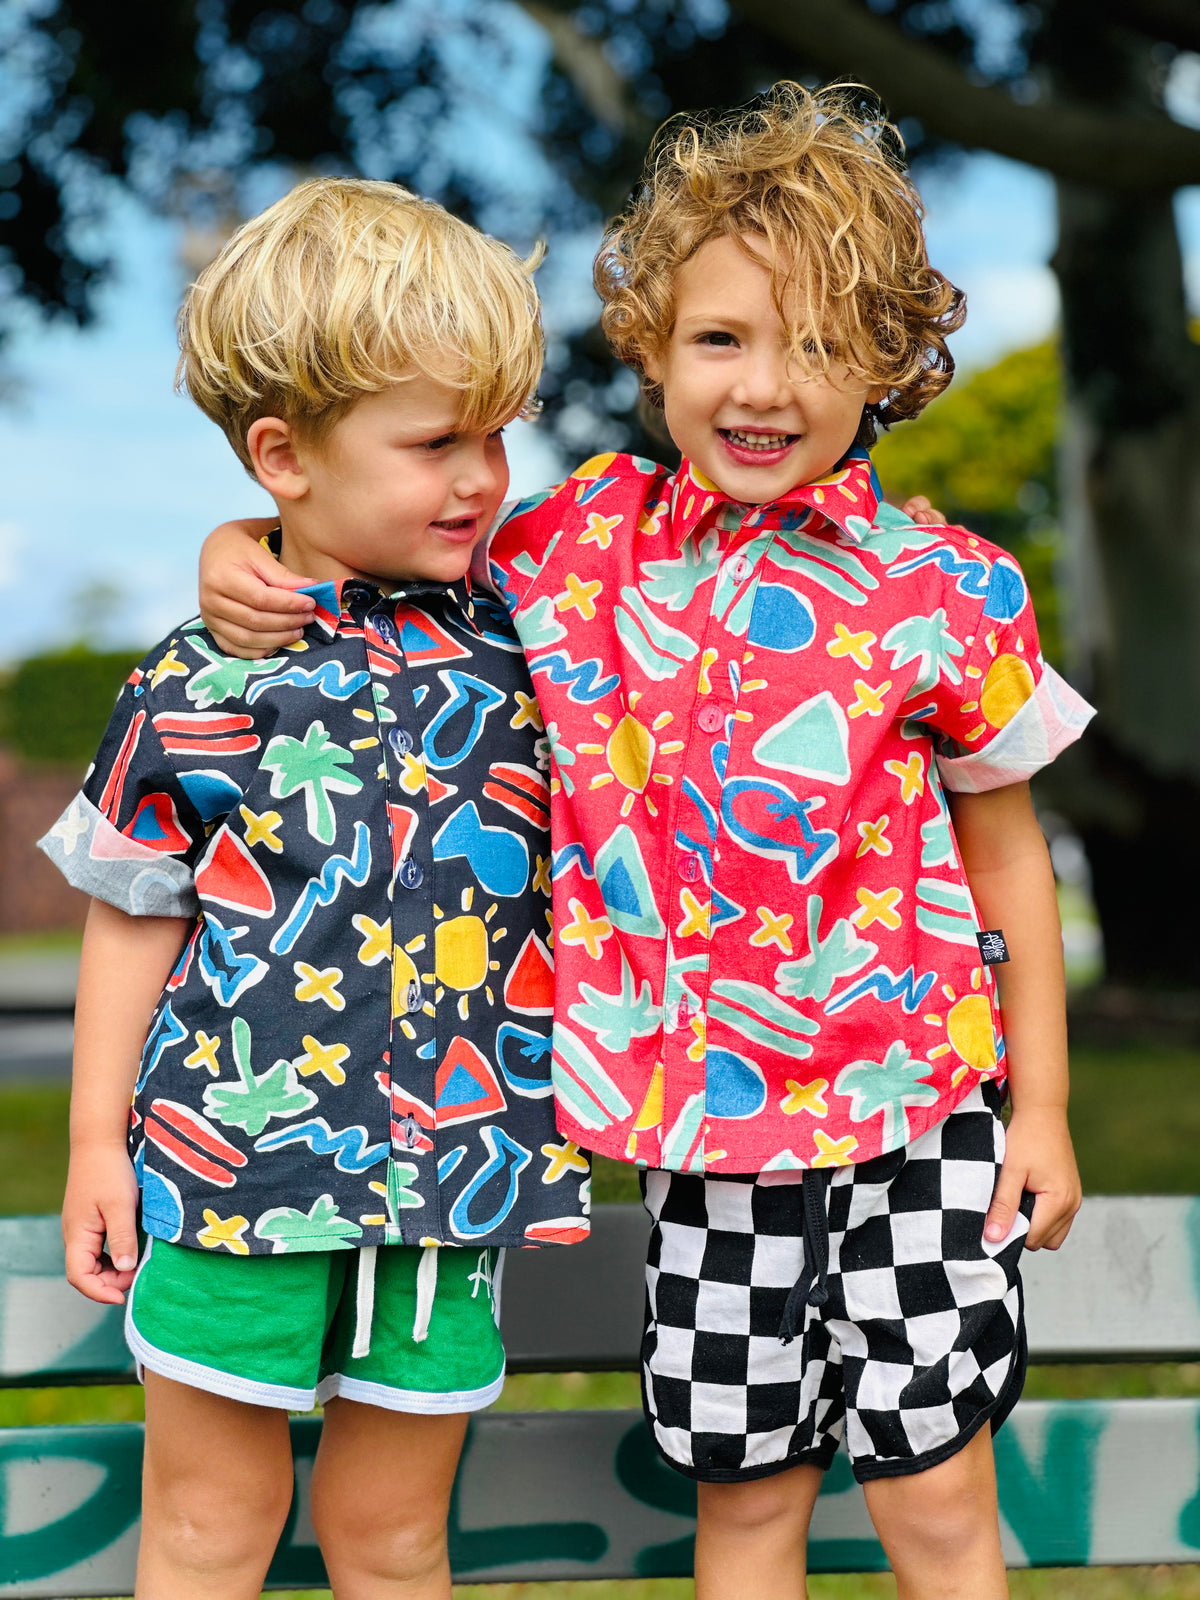 Alfie Red Retro Cotton Party Shirt for Kids